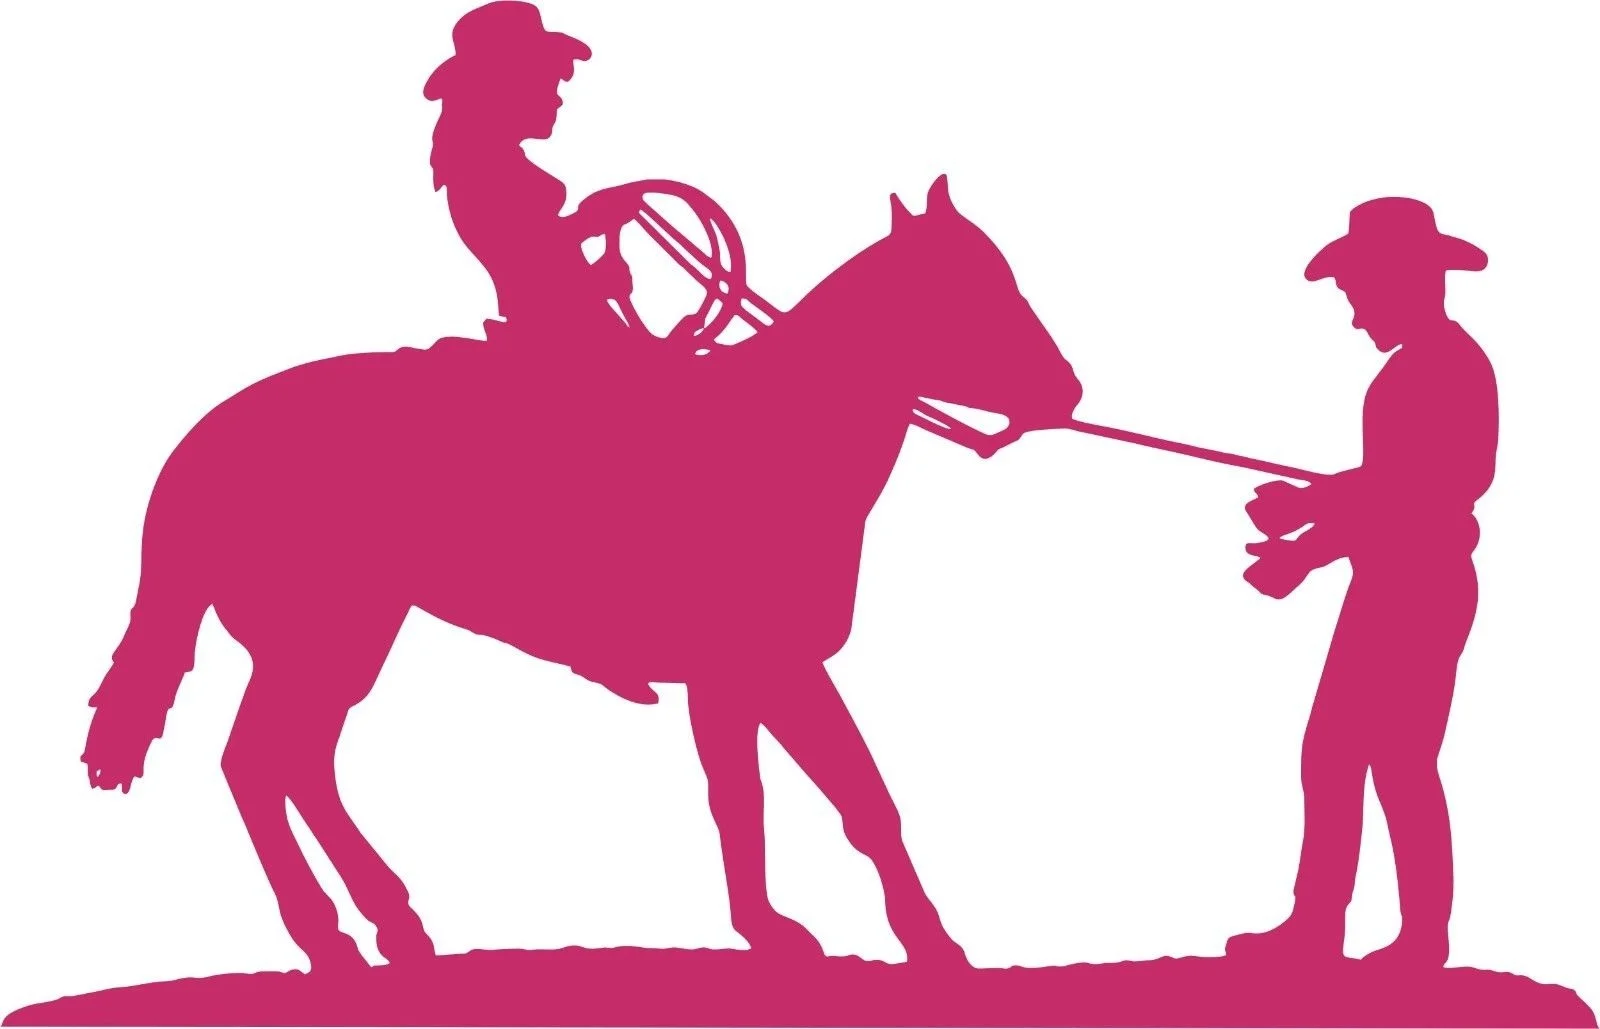 

For Cowgirl Cowboy Horse Rodeo Western Car Truck Window Laptop Vinyl Decal Sticker Styling